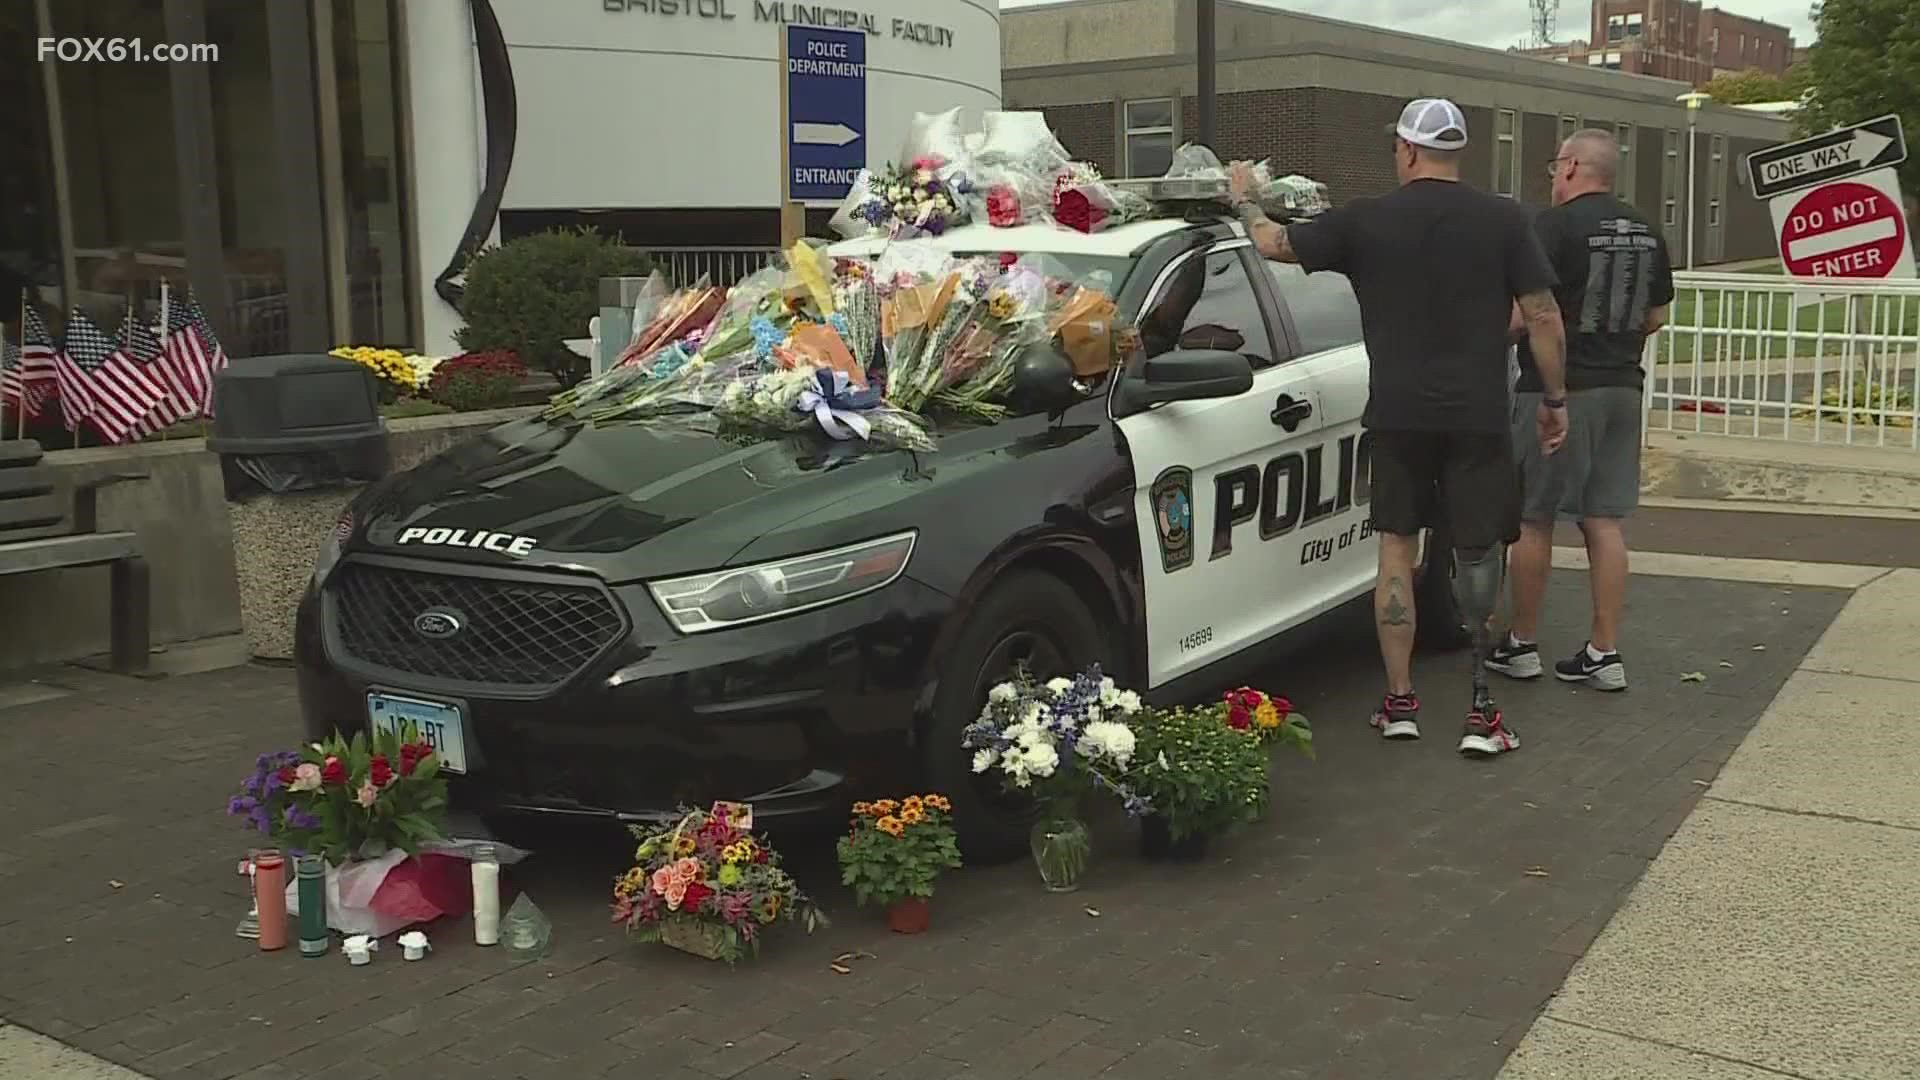 People have been placing flowers on a police vehicle to honor the officers who were killed late Wednesday night.